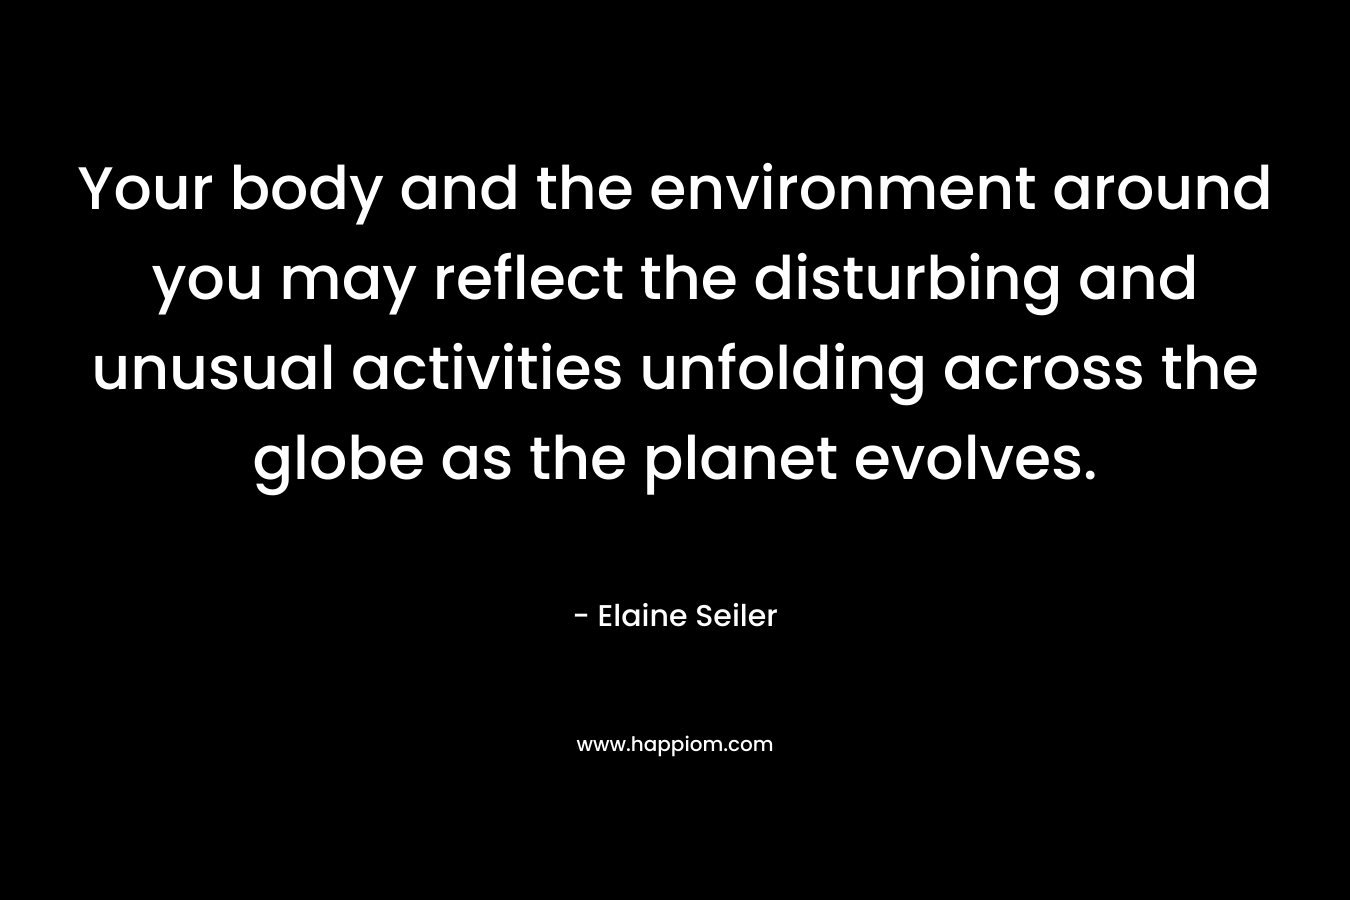 Your body and the environment around you may reflect the disturbing and unusual activities unfolding across the globe as the planet evolves. – Elaine Seiler